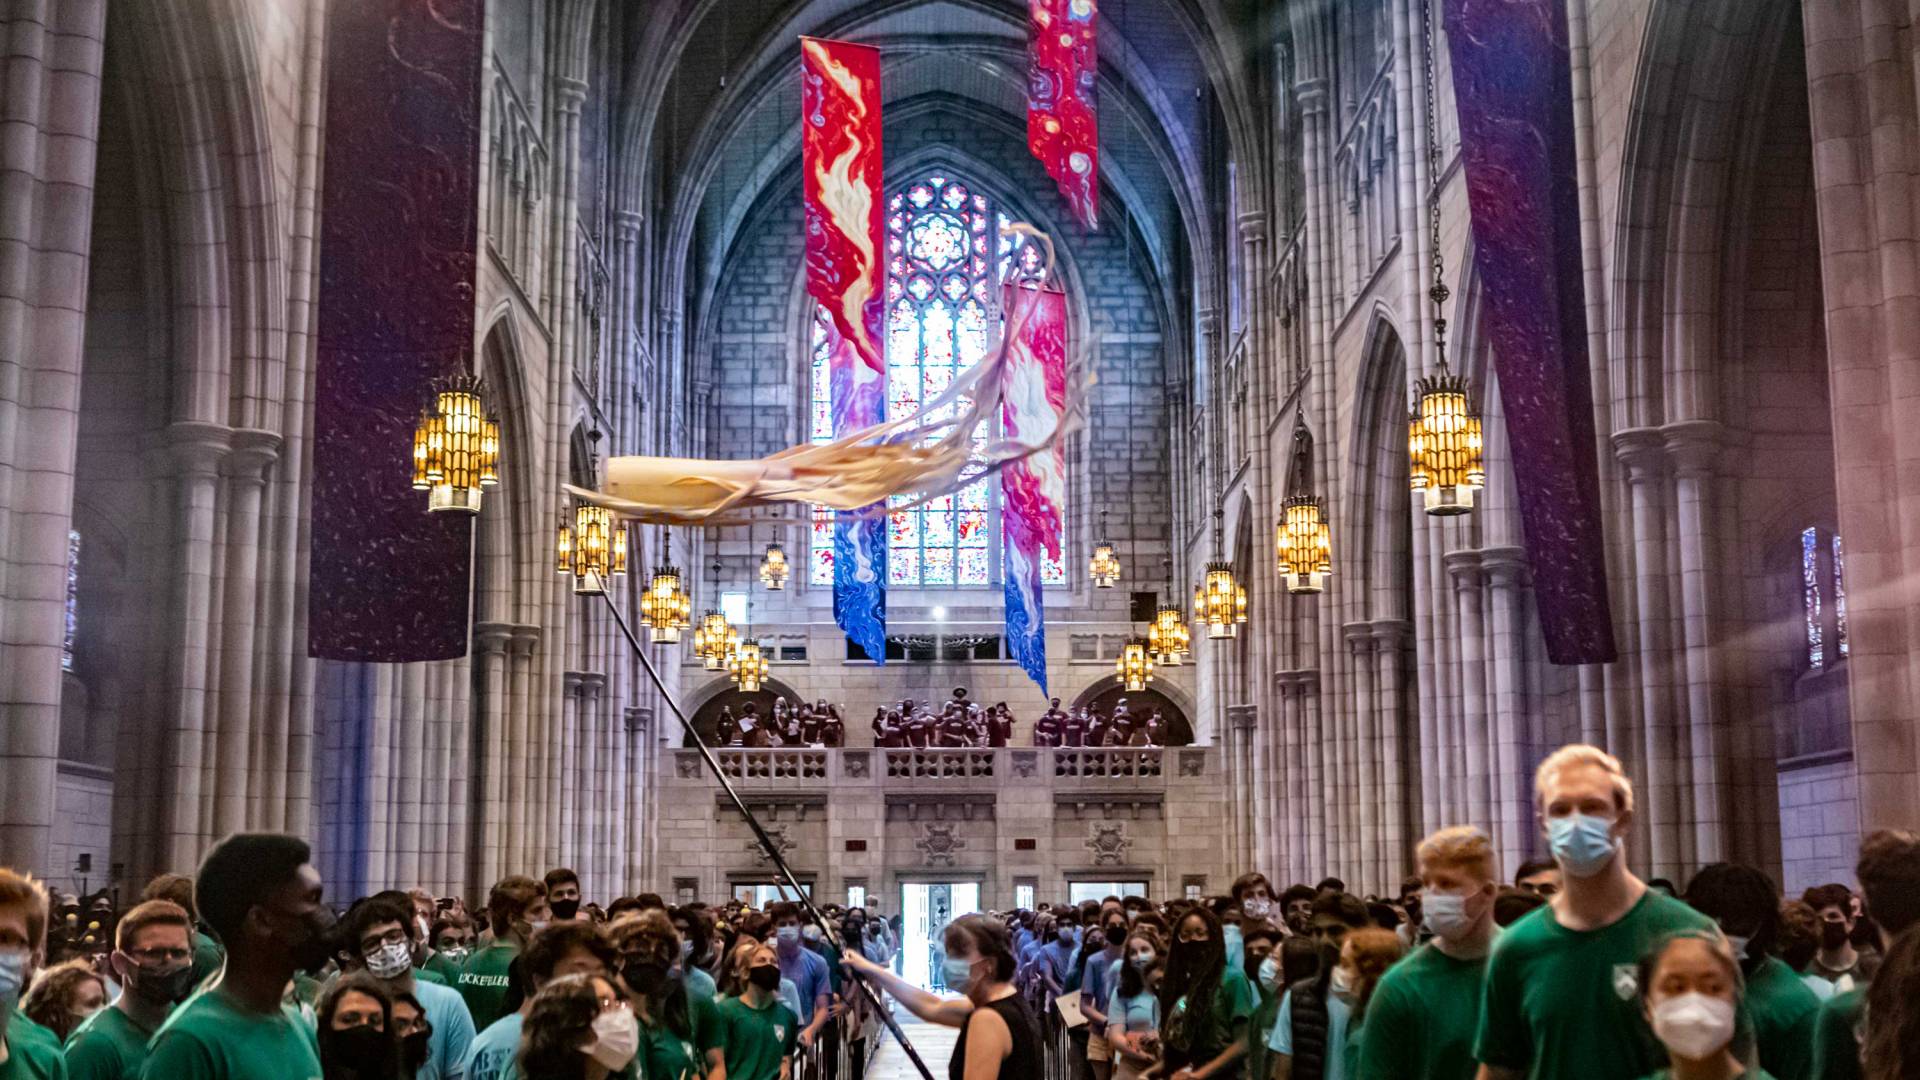 Students watch as the kite flyers walk up the chapel aisle